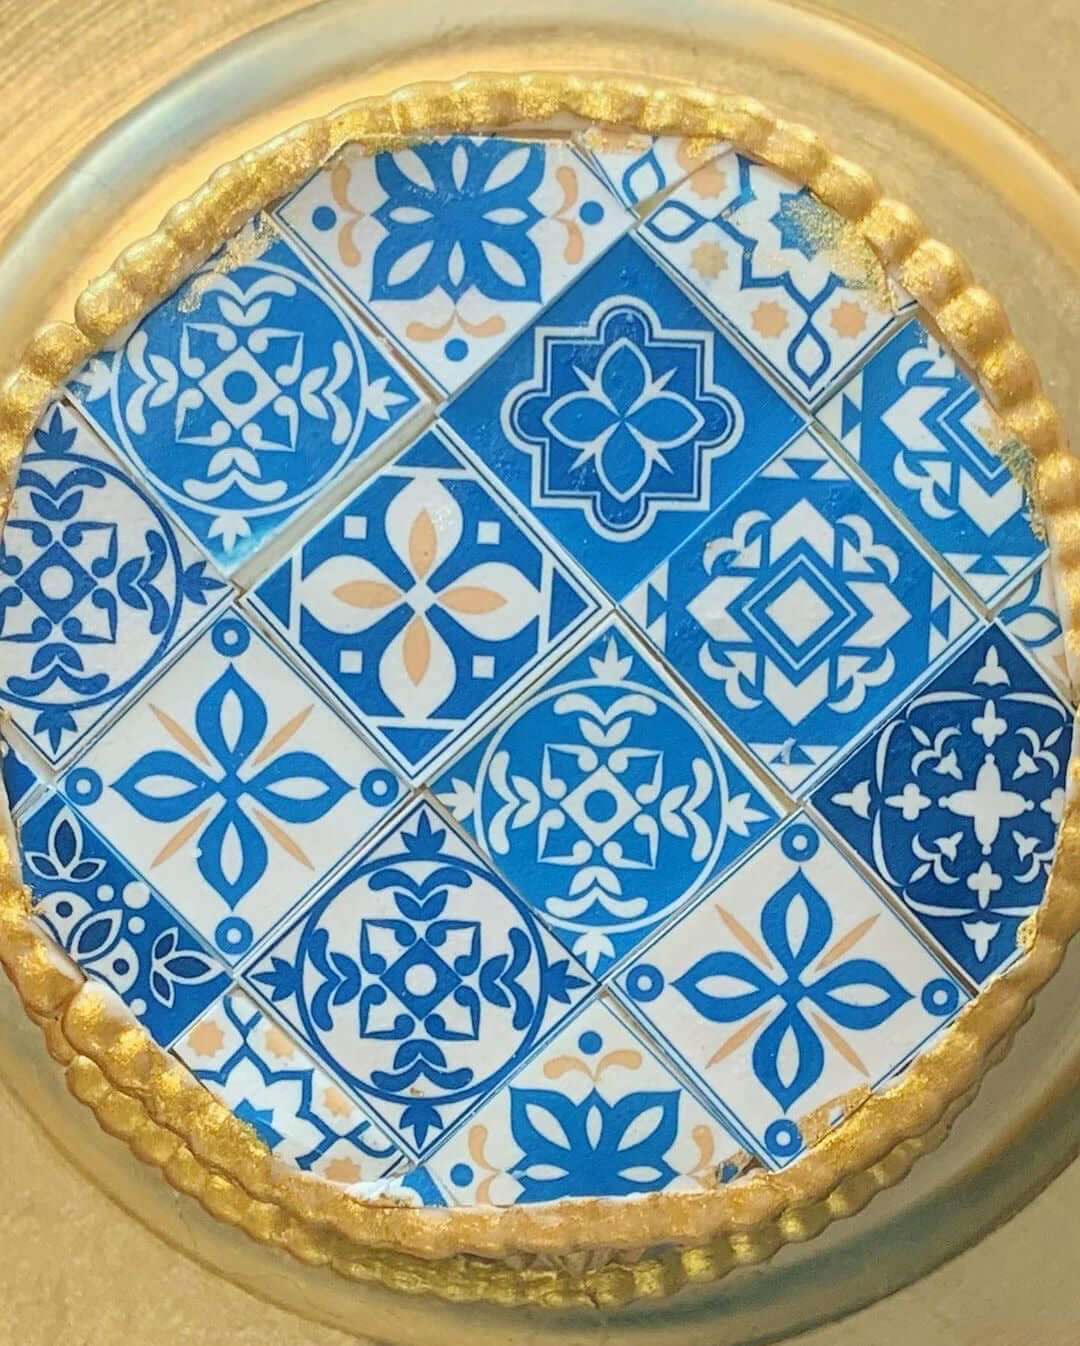 Tiles With Floral Texture - Icing - ISA090.